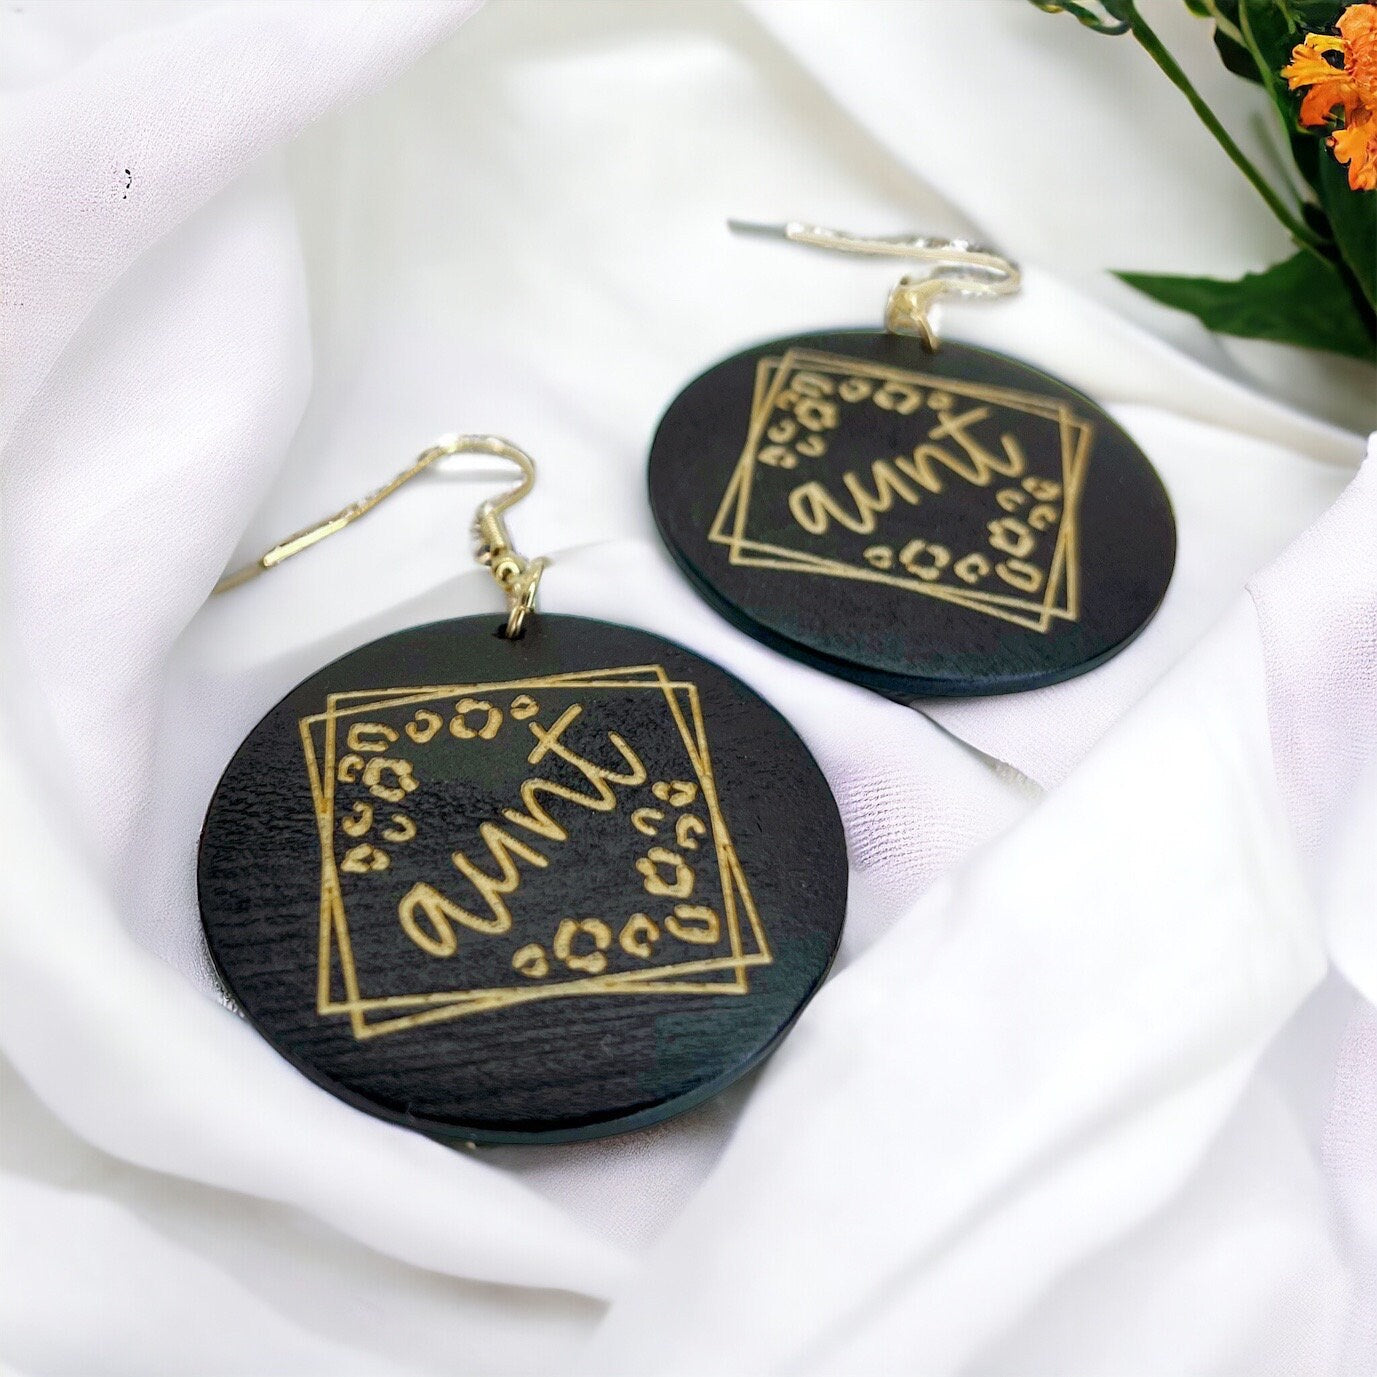 Aunt Earrings - Auntie Earrings, Aunt Gift, Aunt Accessories, Boho Chic, Aunt Life, Aunt Jewelry, Handmade Earrings, Handmade Jewelry